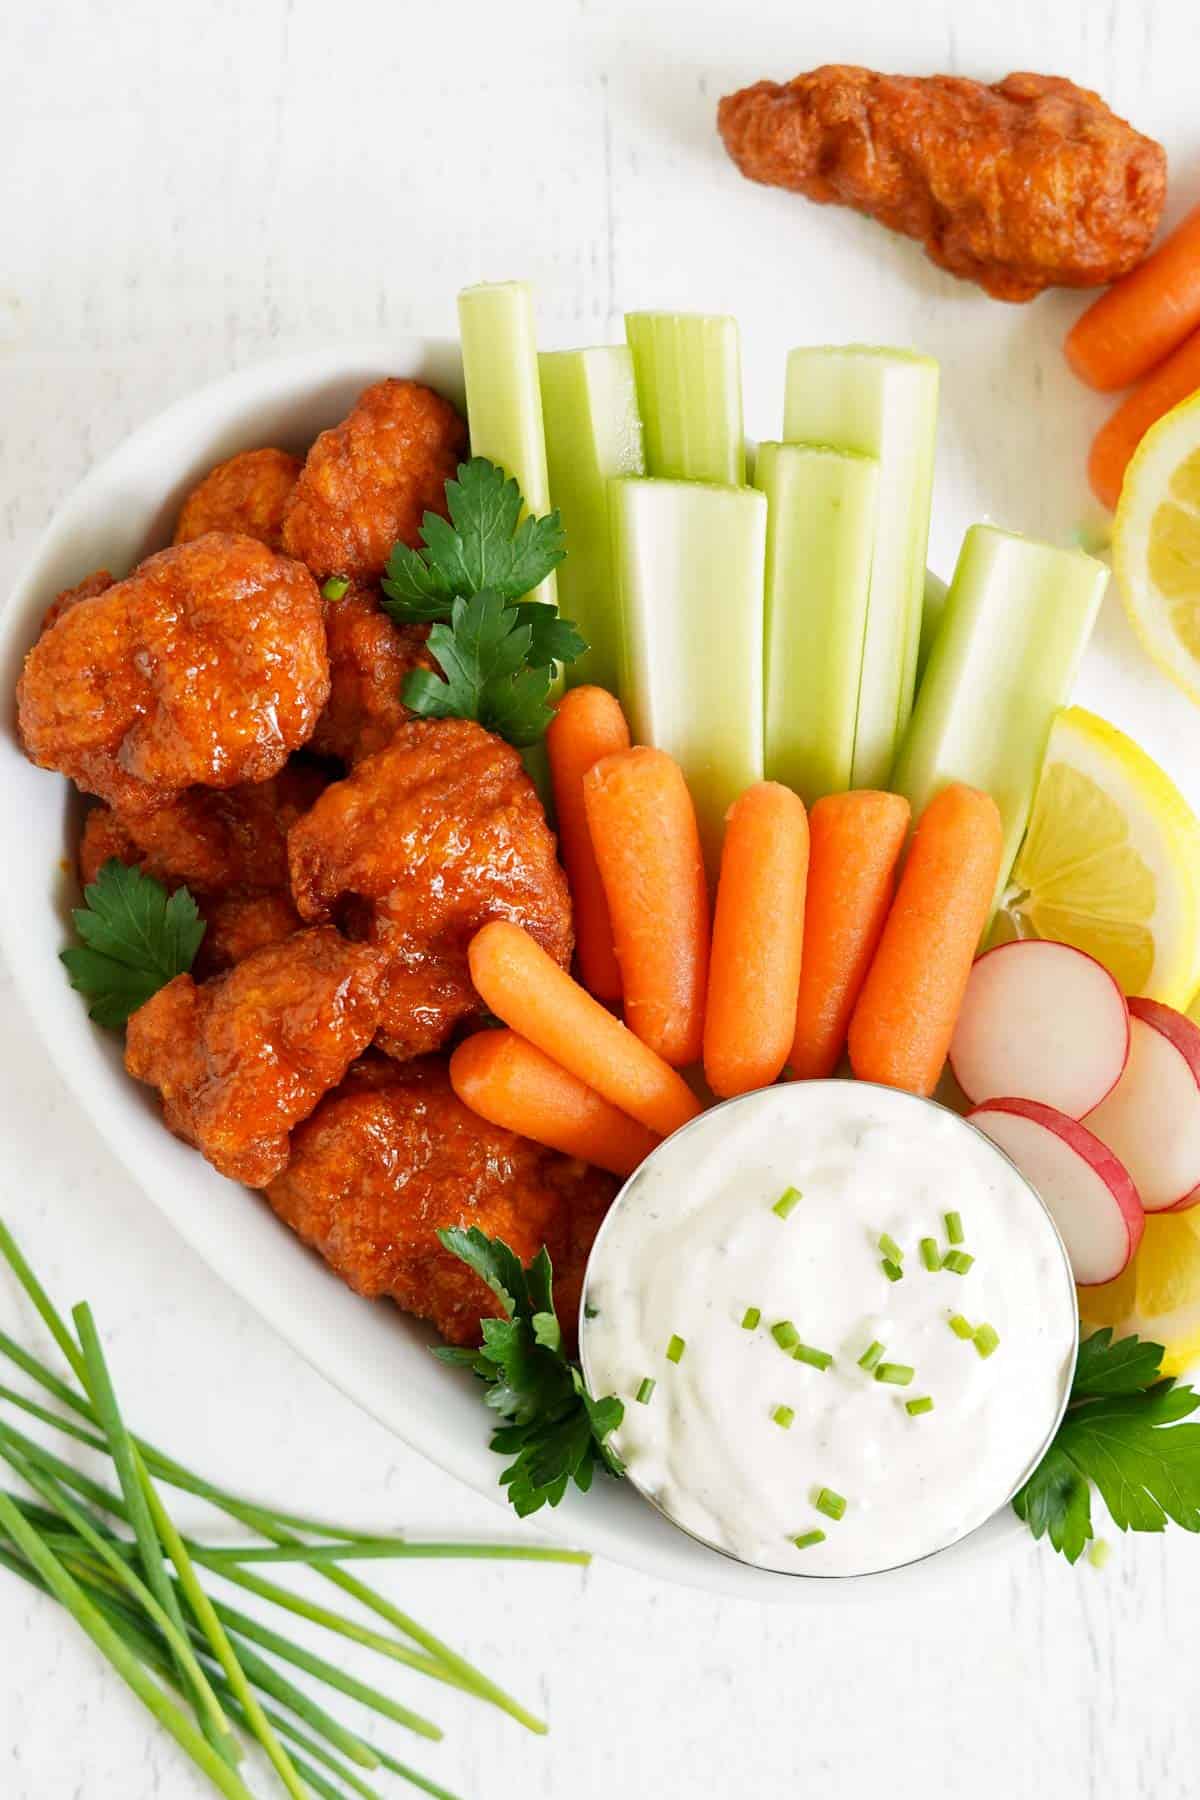 blue cheese dip on a platter with fresh veggies and buffalo chicken.